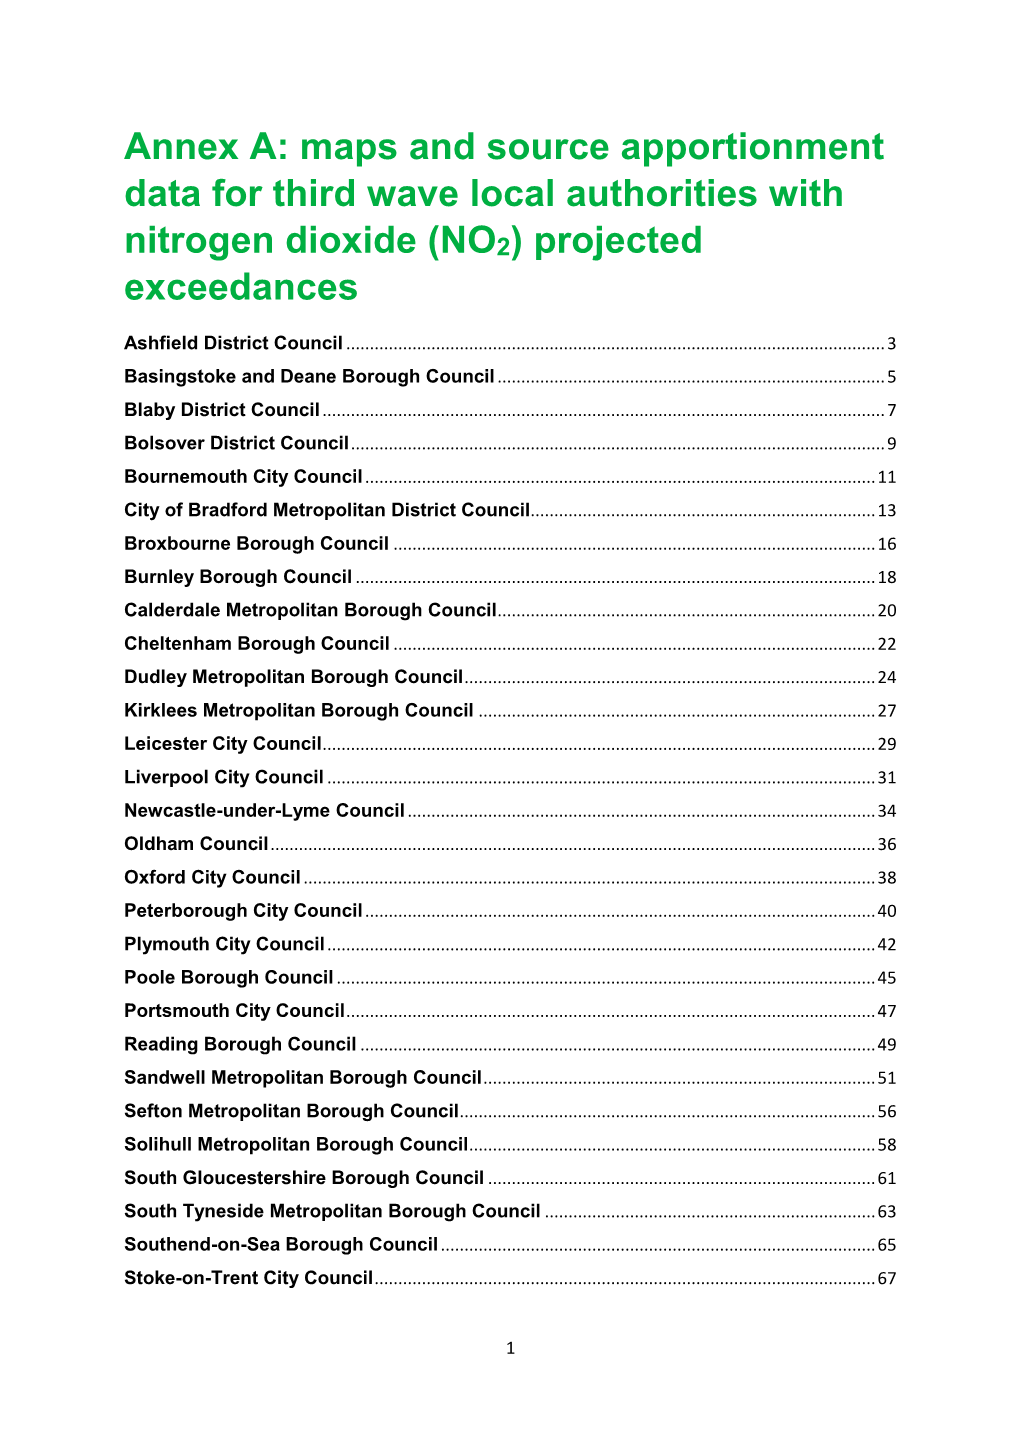 Maps and Source Apportionment Data for Third Wave Local Authorities with Nitrogen Dioxide (NO2) Projected Exceedances